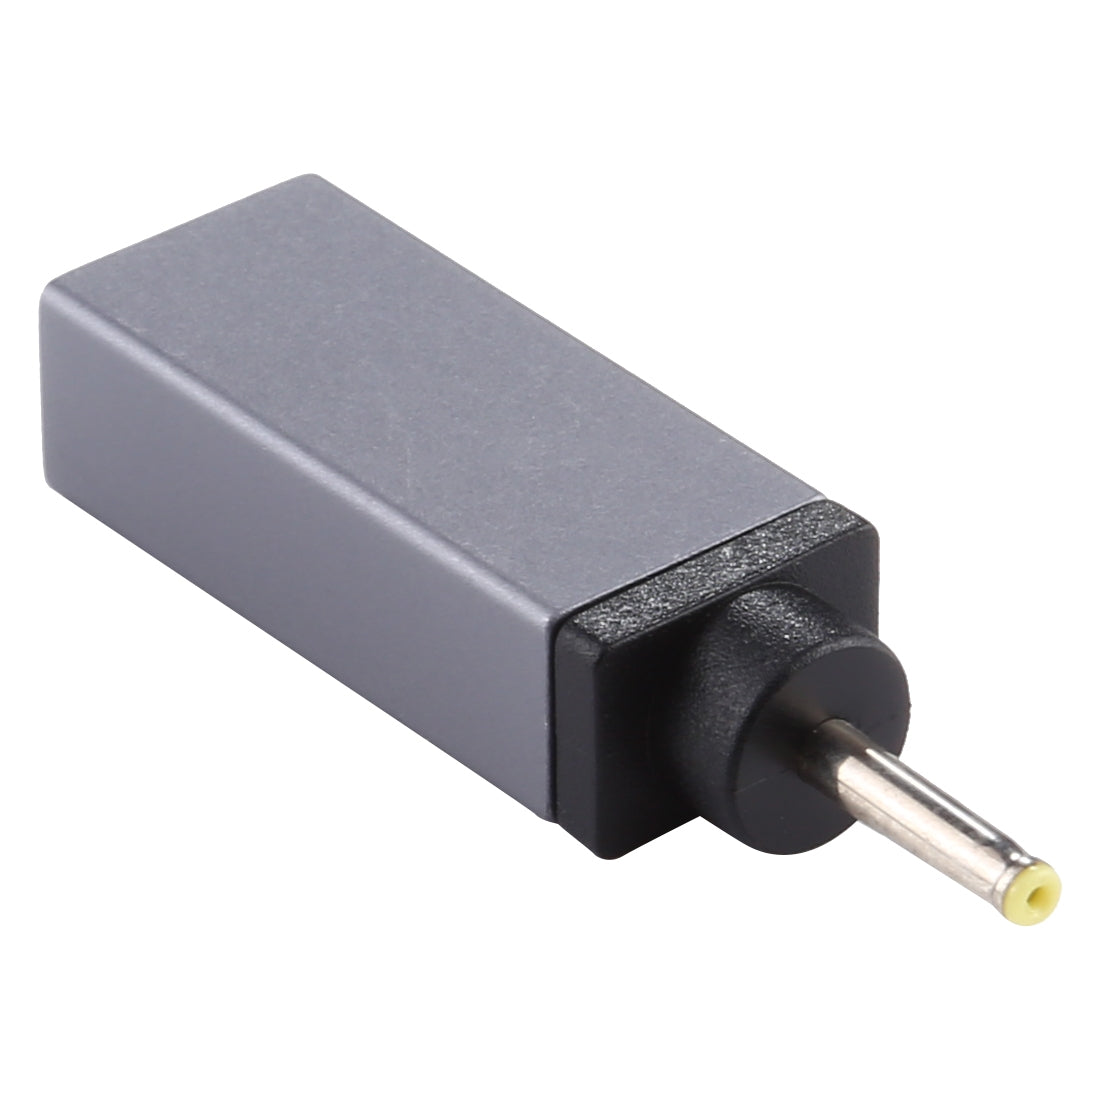 PD 18.5V-20V 2.5x0.7mm Male Adapter Connector